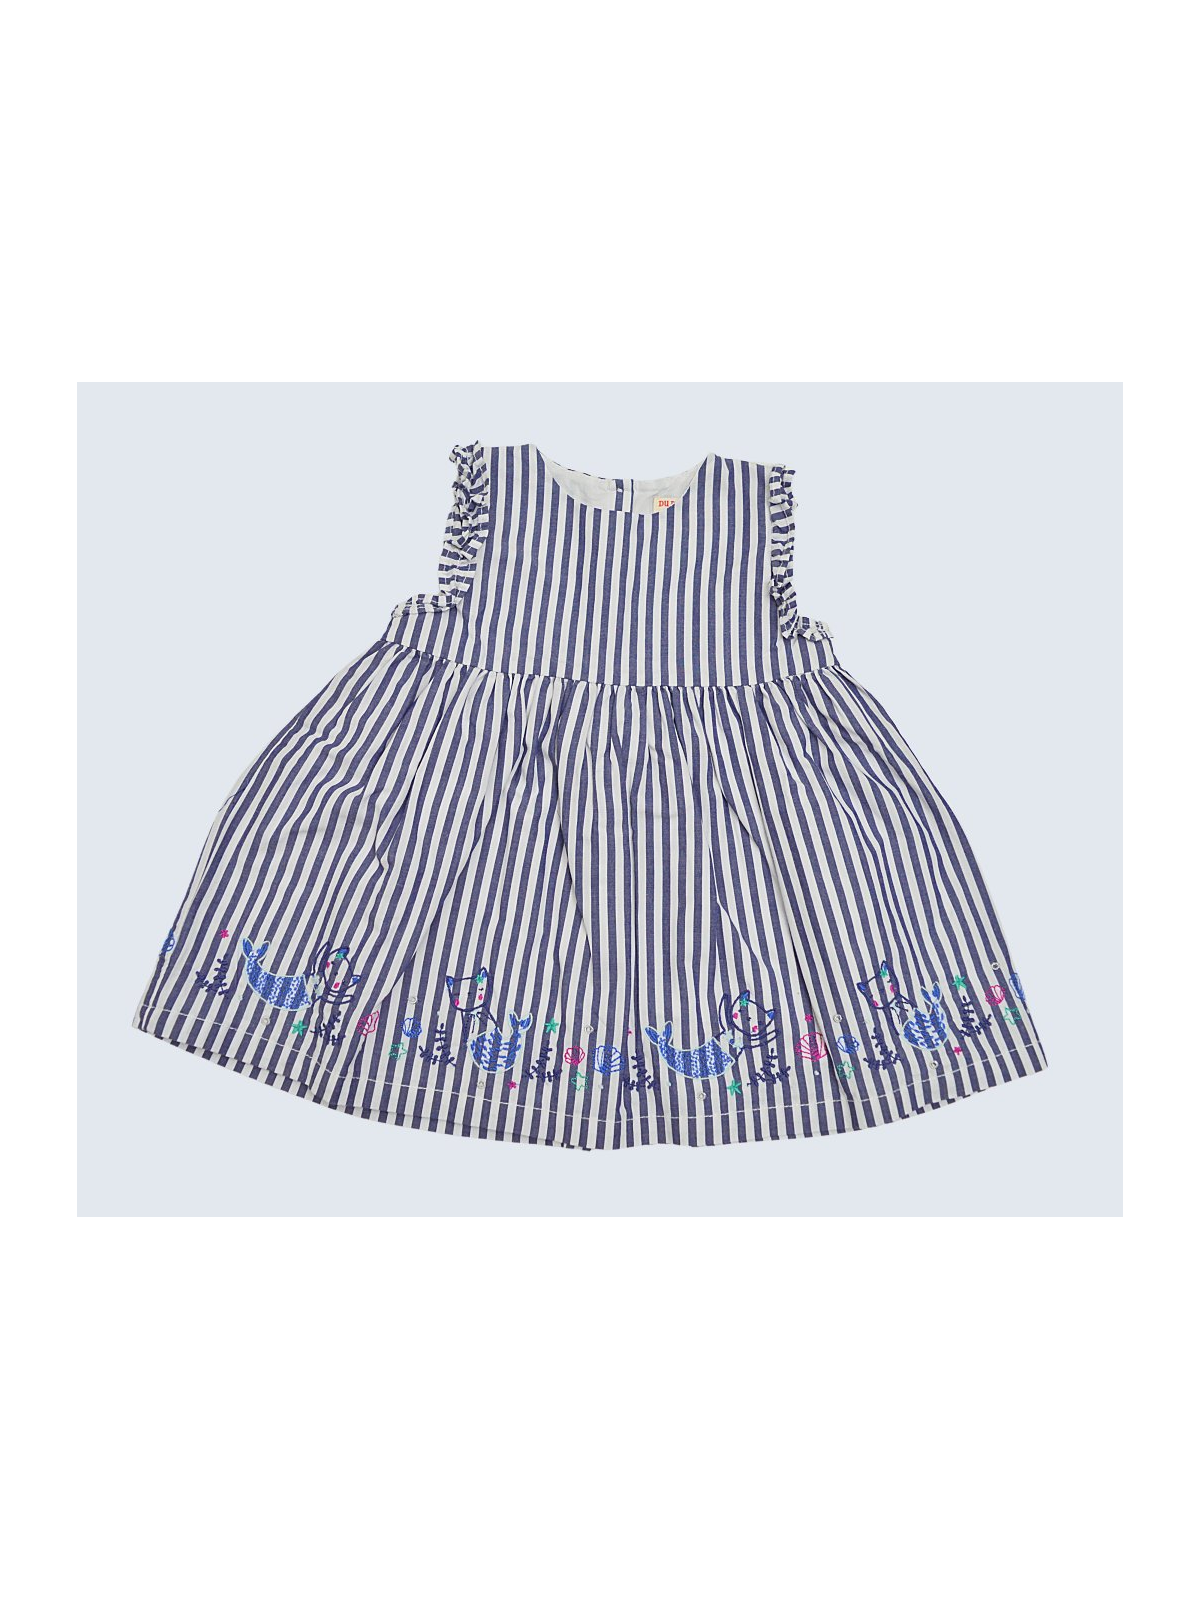 Robe d'occasion DPAM 12 Mois pour fille.